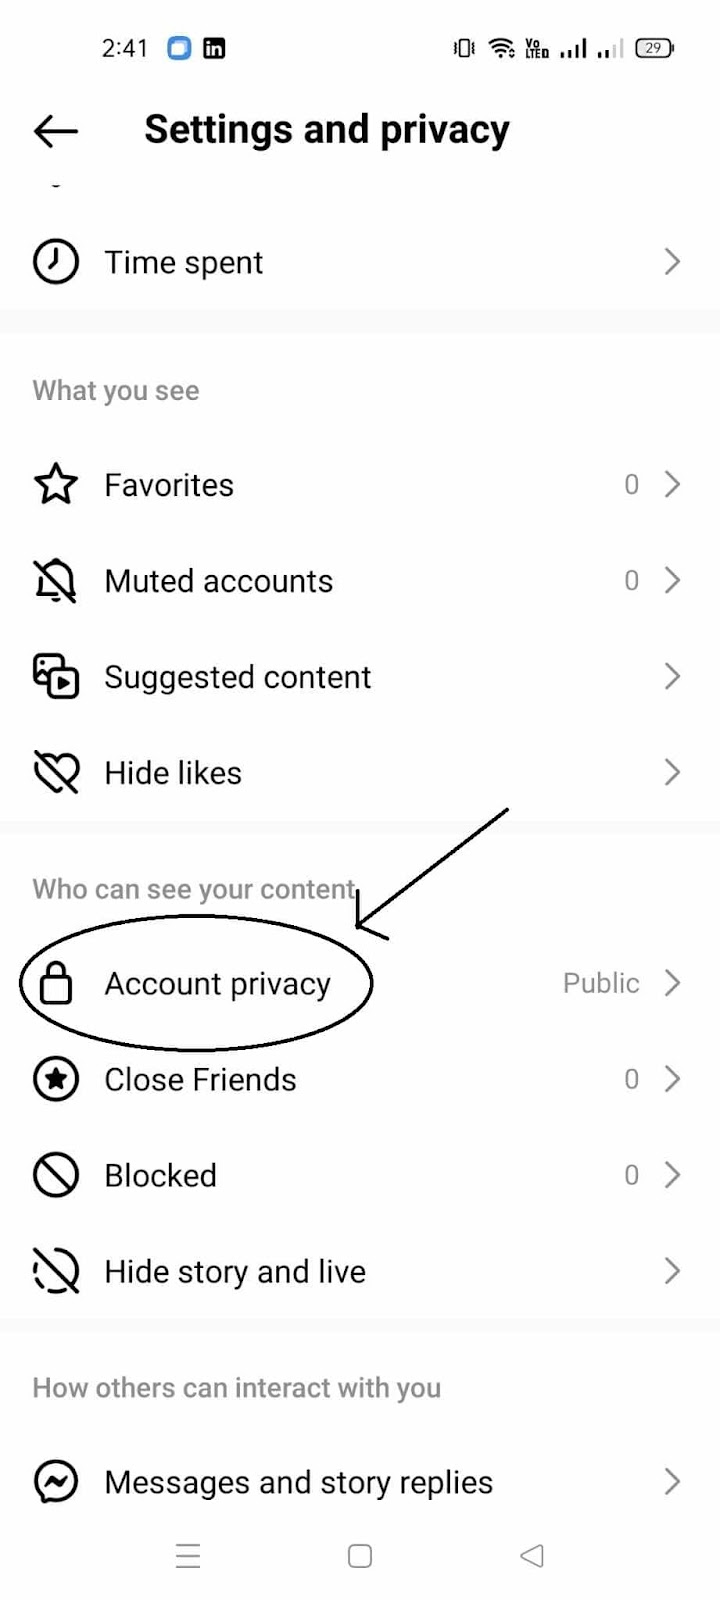 Can’t be Invited as a Collaborator yet - Account Privacy